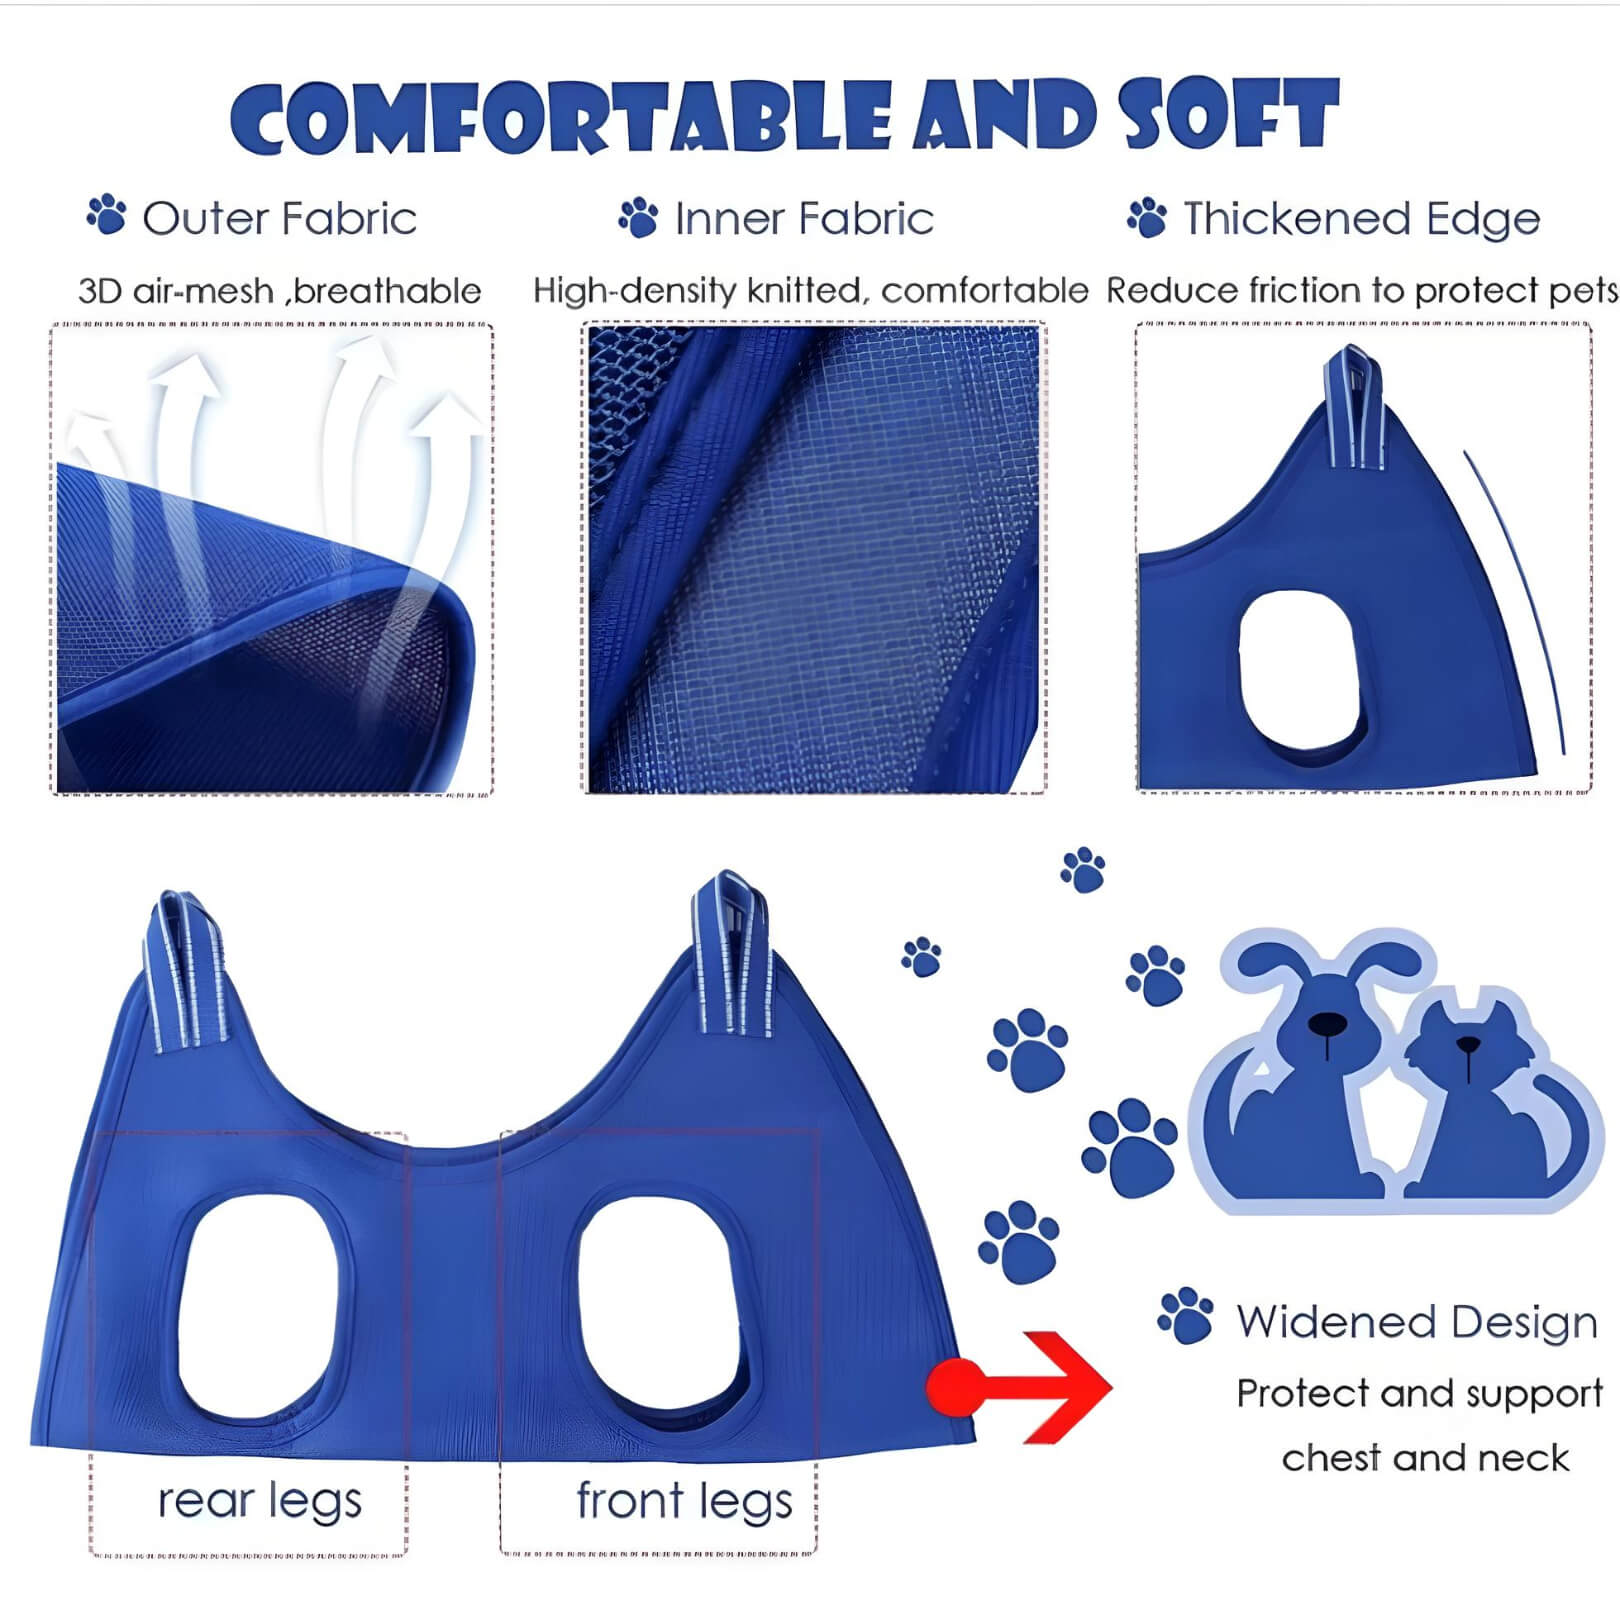 showing-different-parts-of-grooming-harness